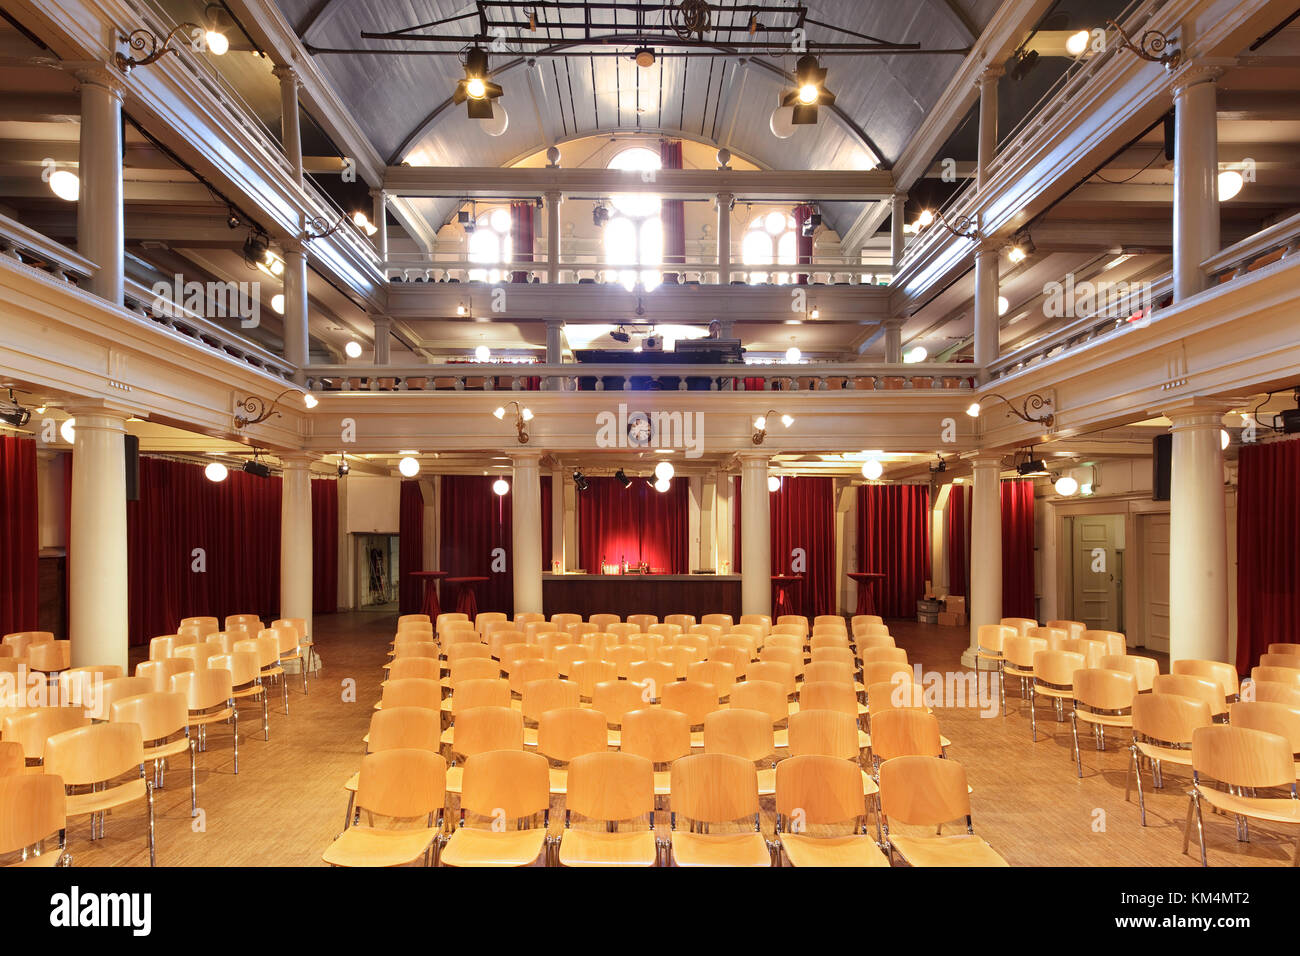 View from stage towards rear of auditorium, with wooden seating. De Rode Hoed Cultural Centre, Amsterdam, Netherlands. Architect: Unknown, 1630. Stock Photo